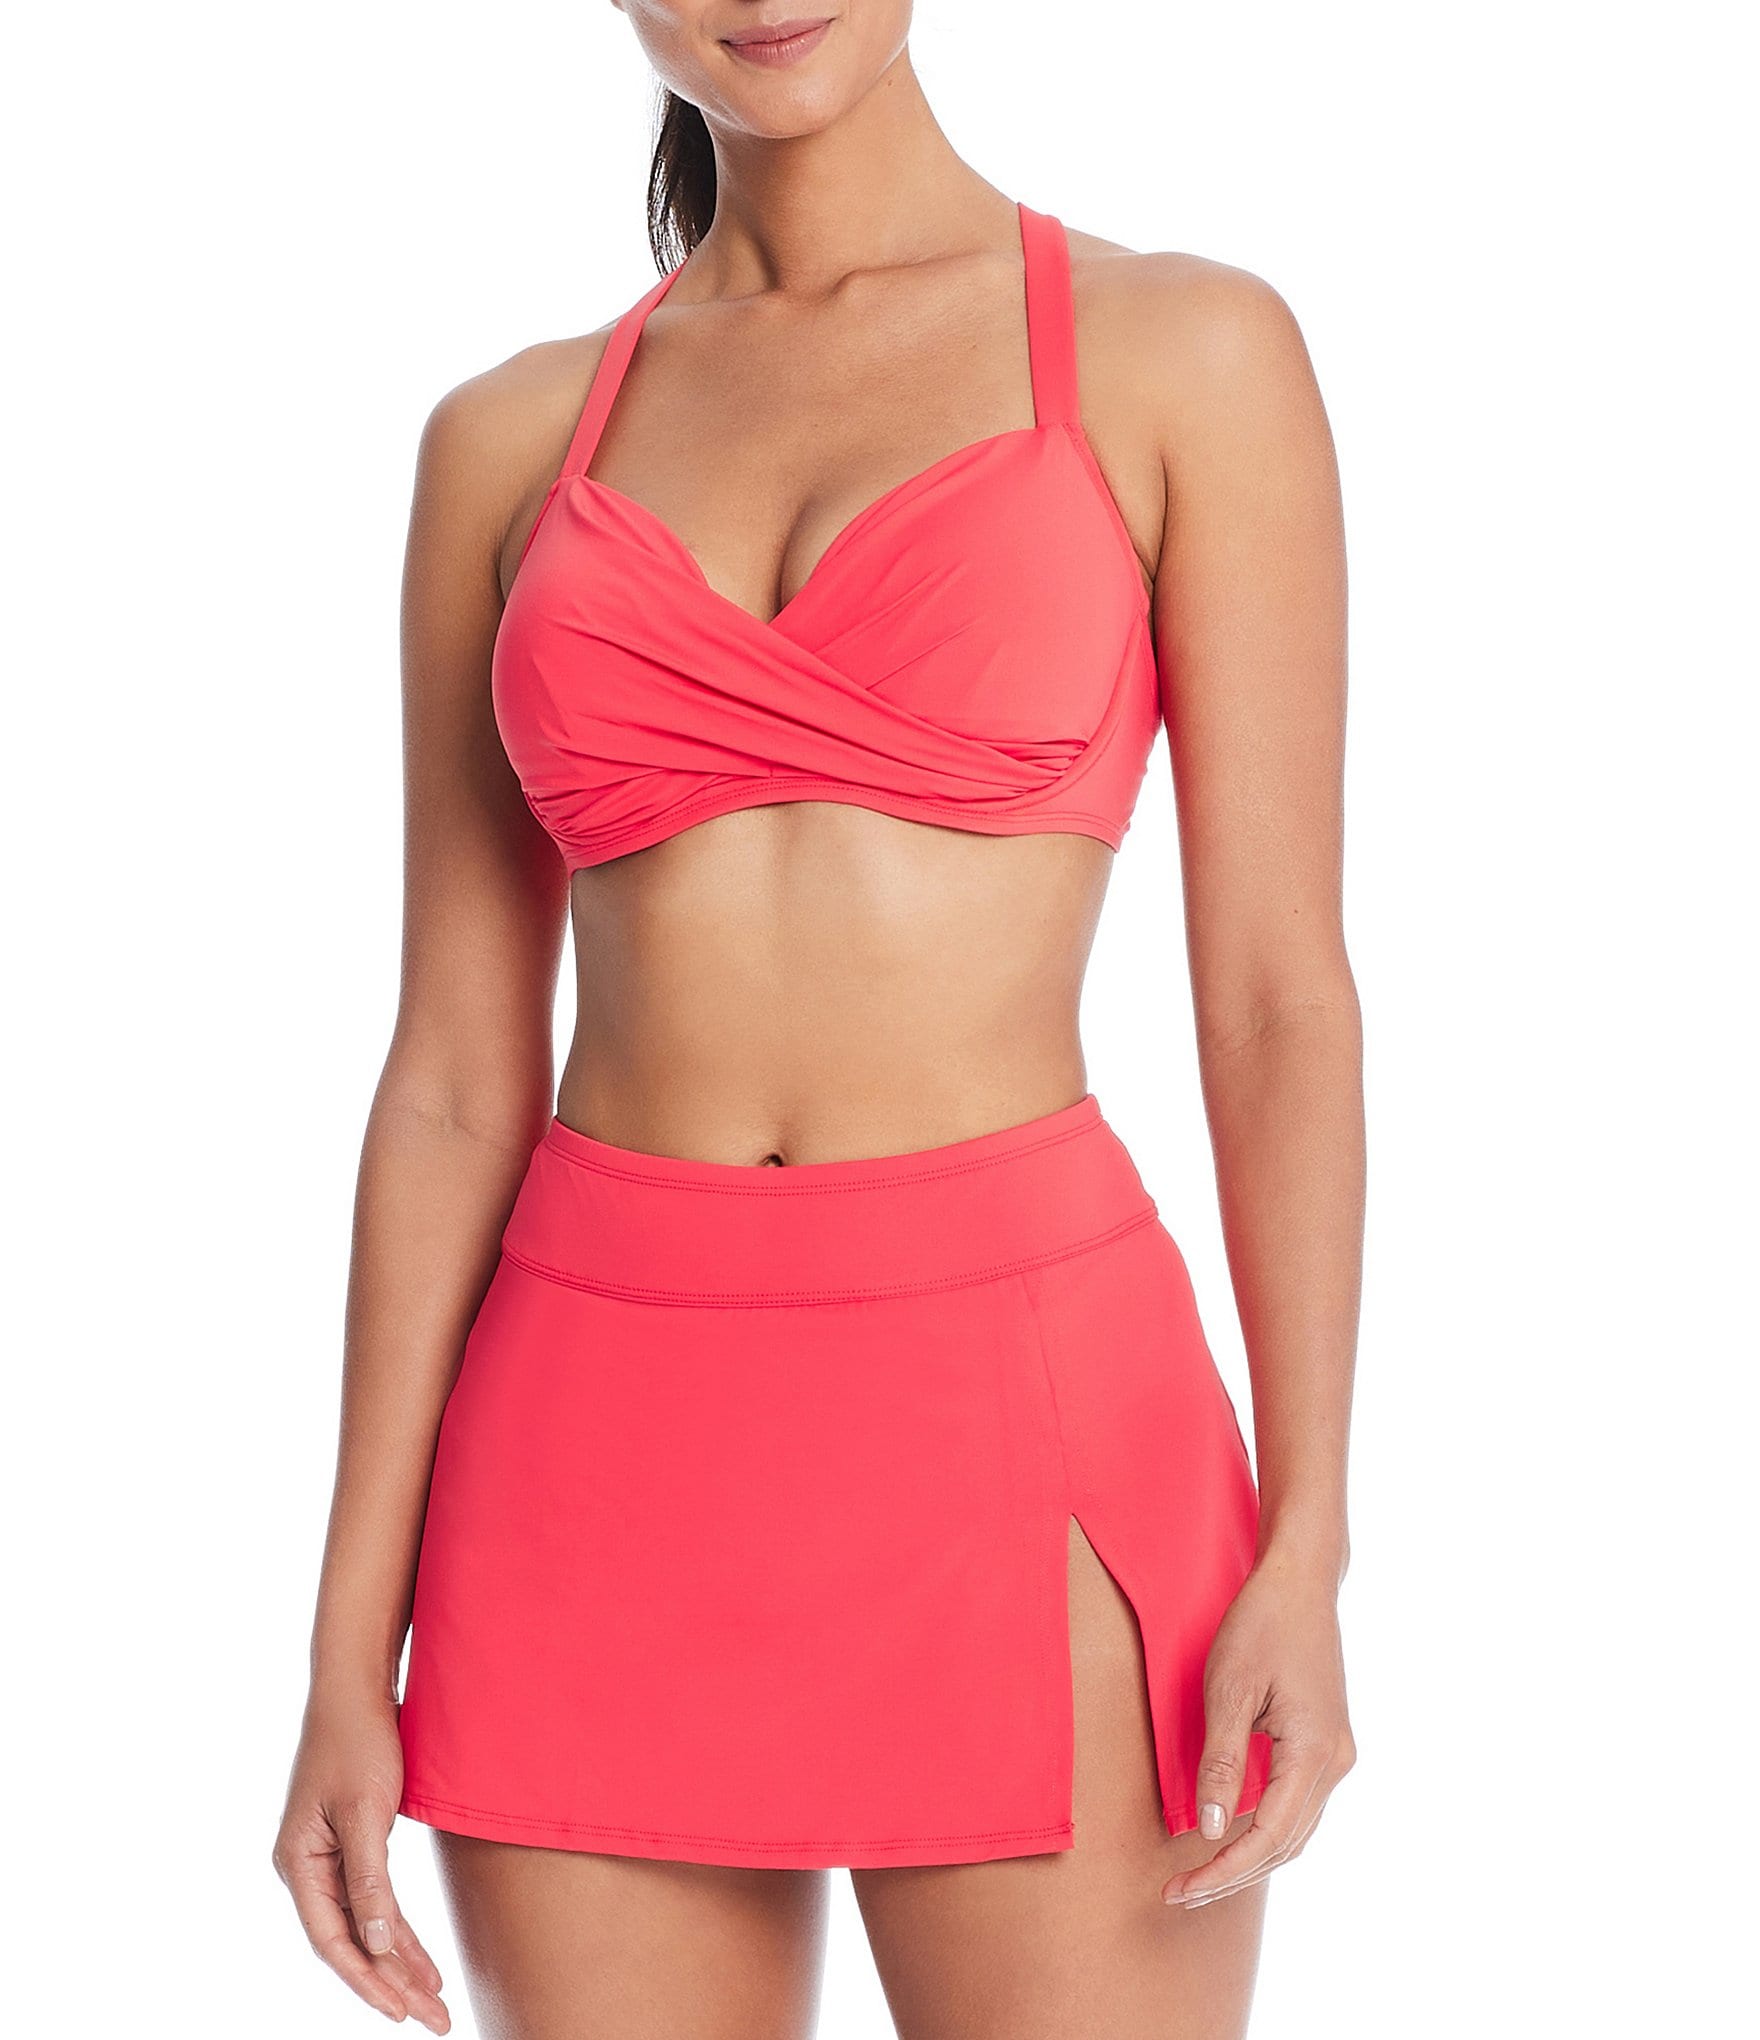 Bathing suits that double as sports bras